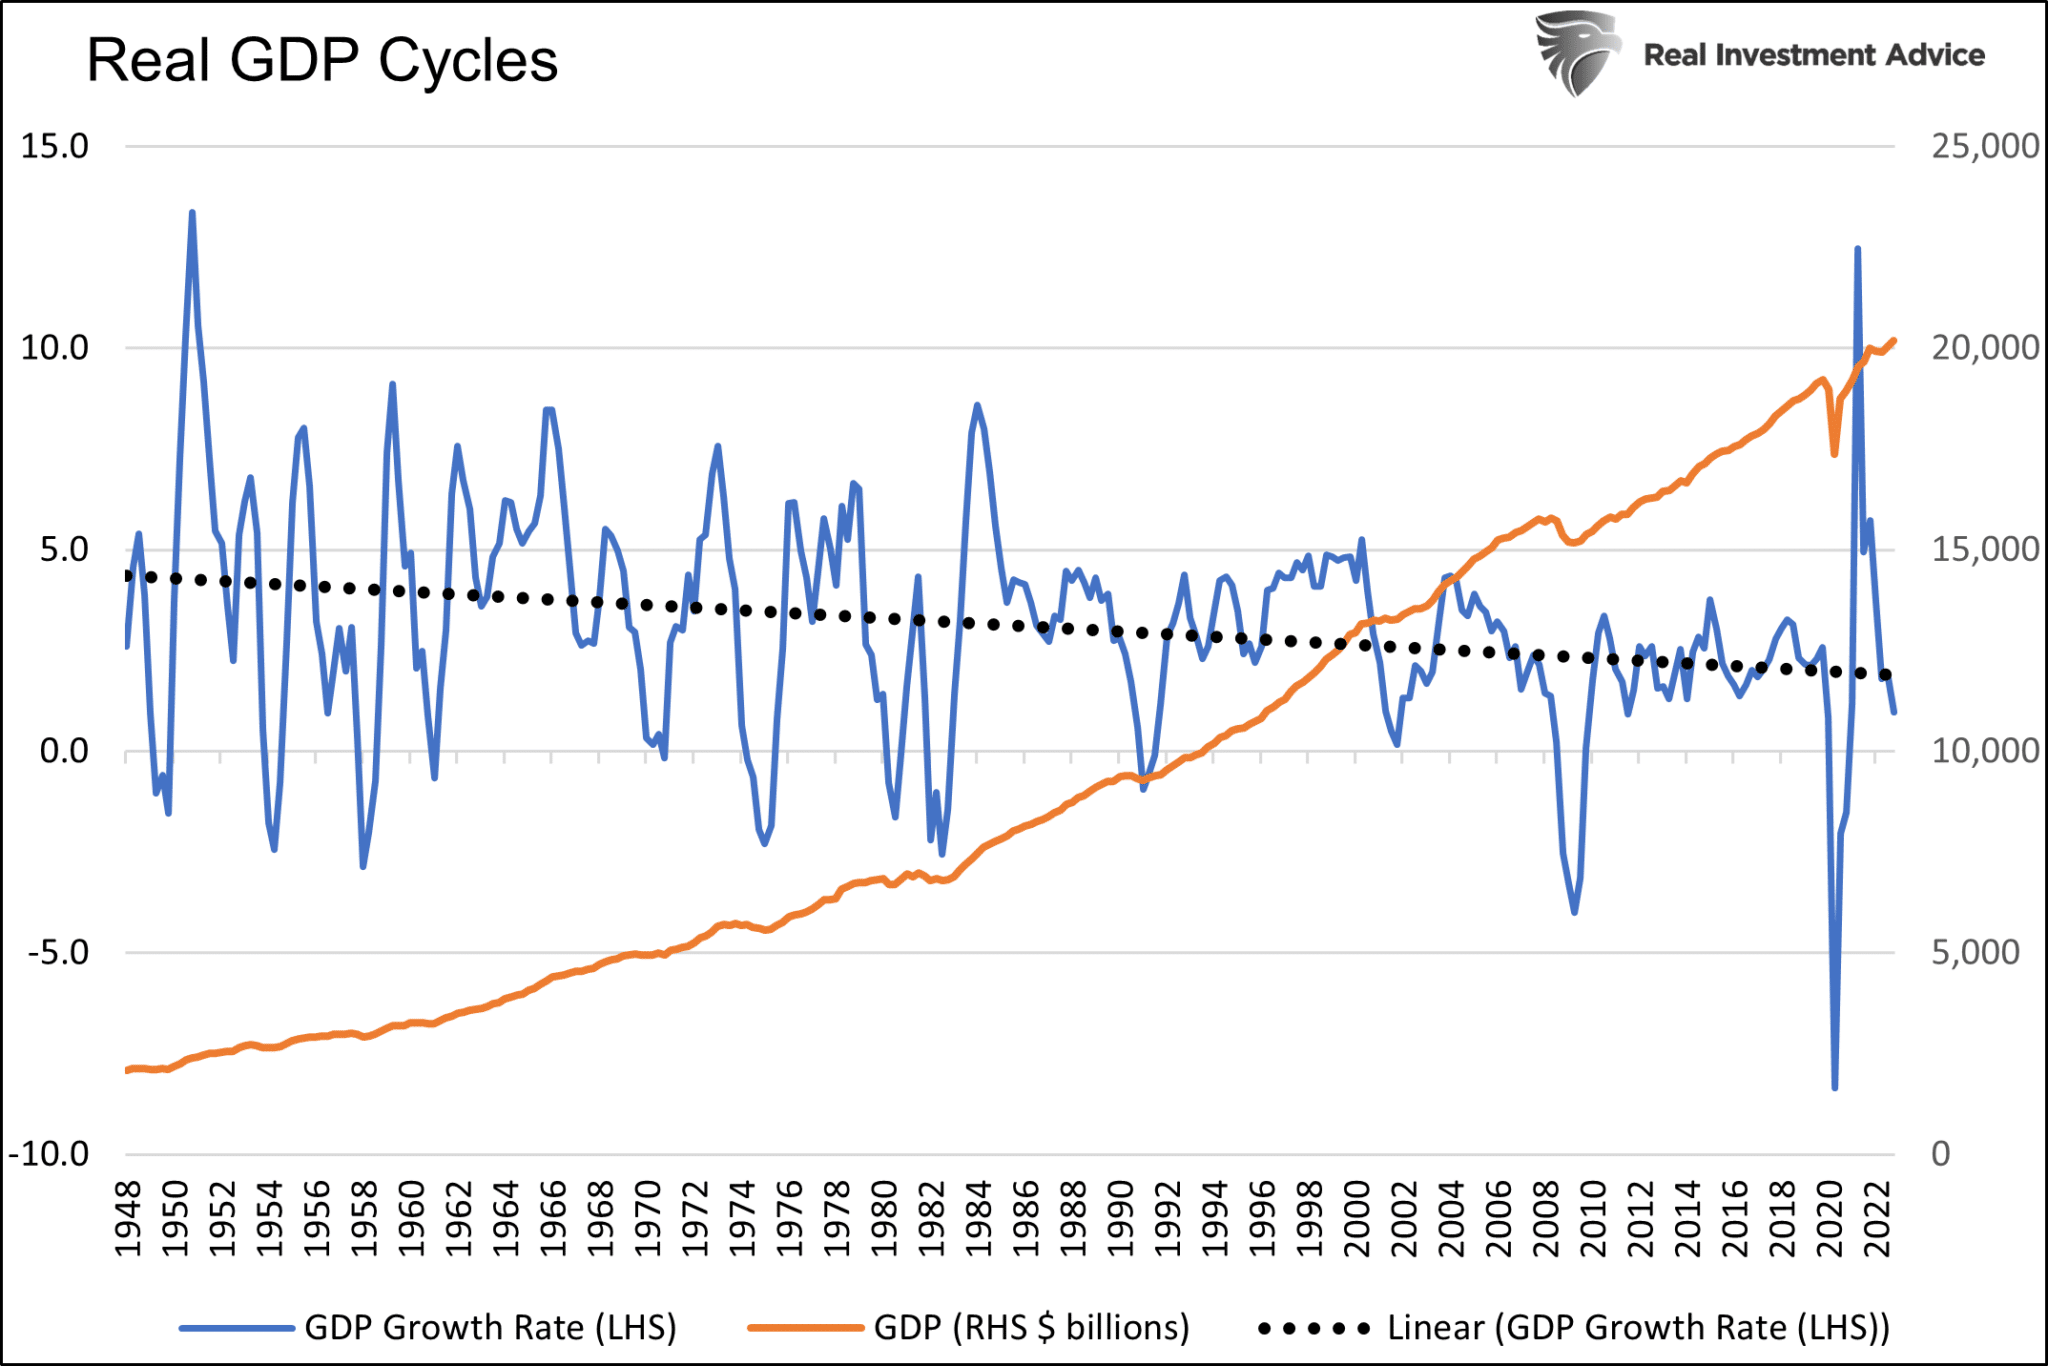 Real GDP Cycles